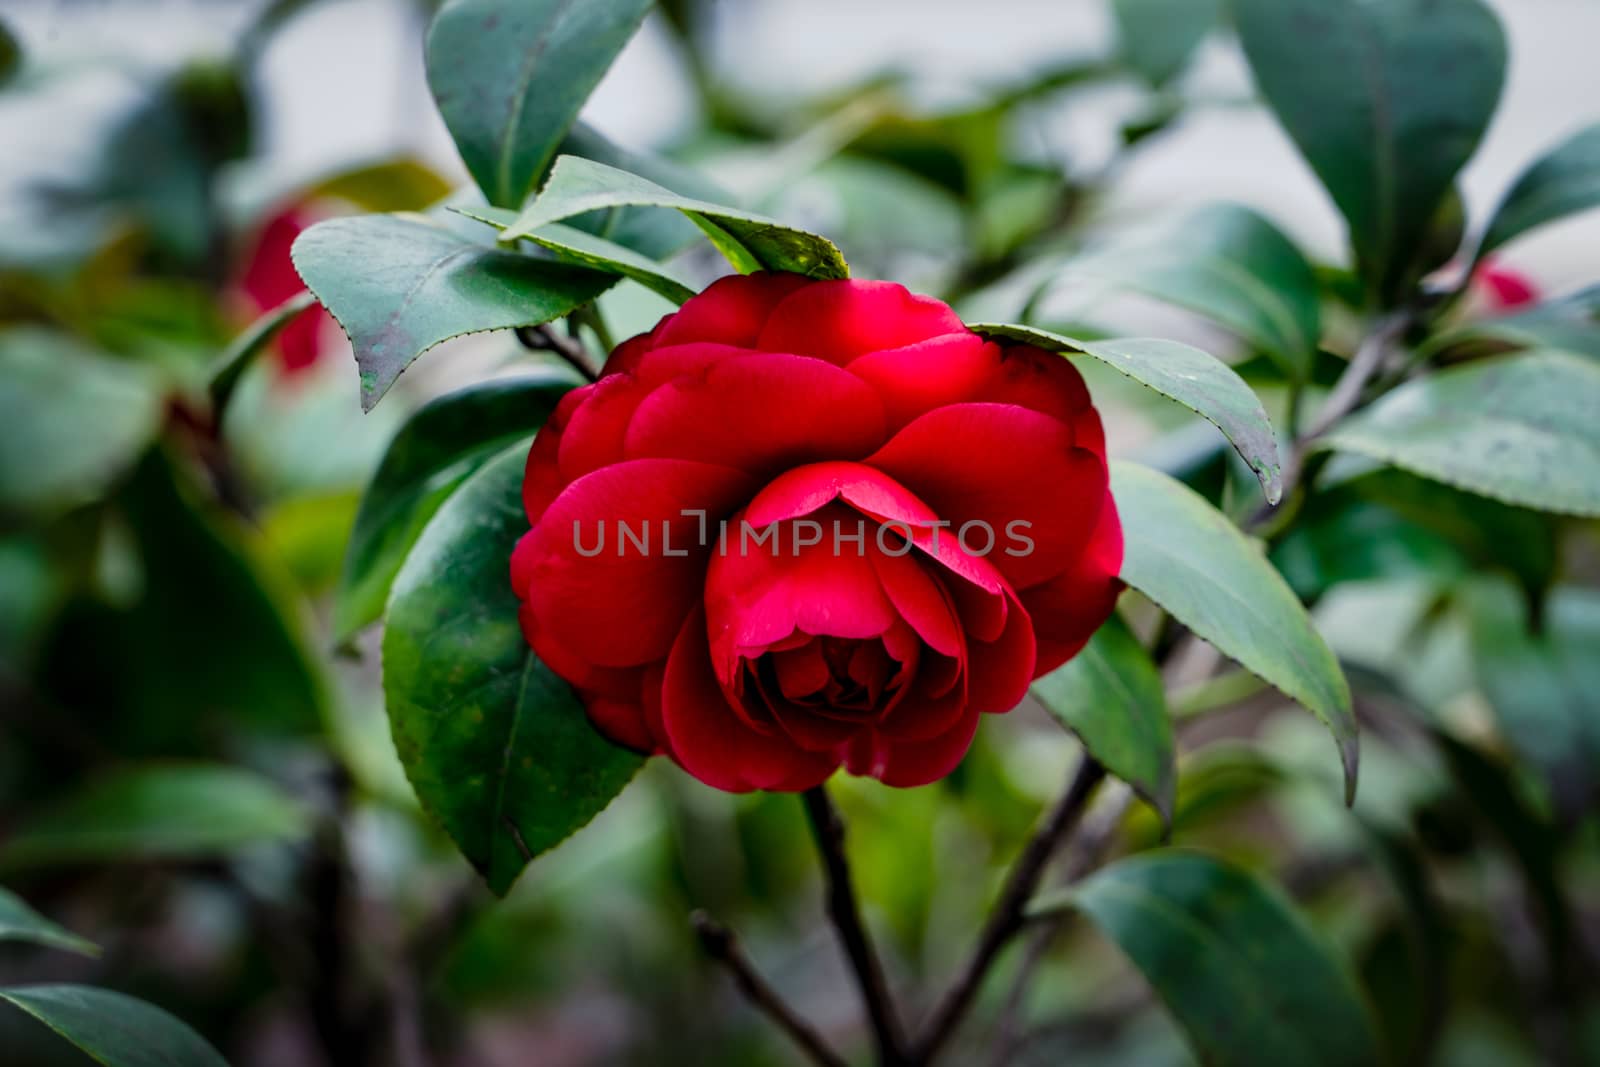 Red rose on the tree in blurred background by psodaz